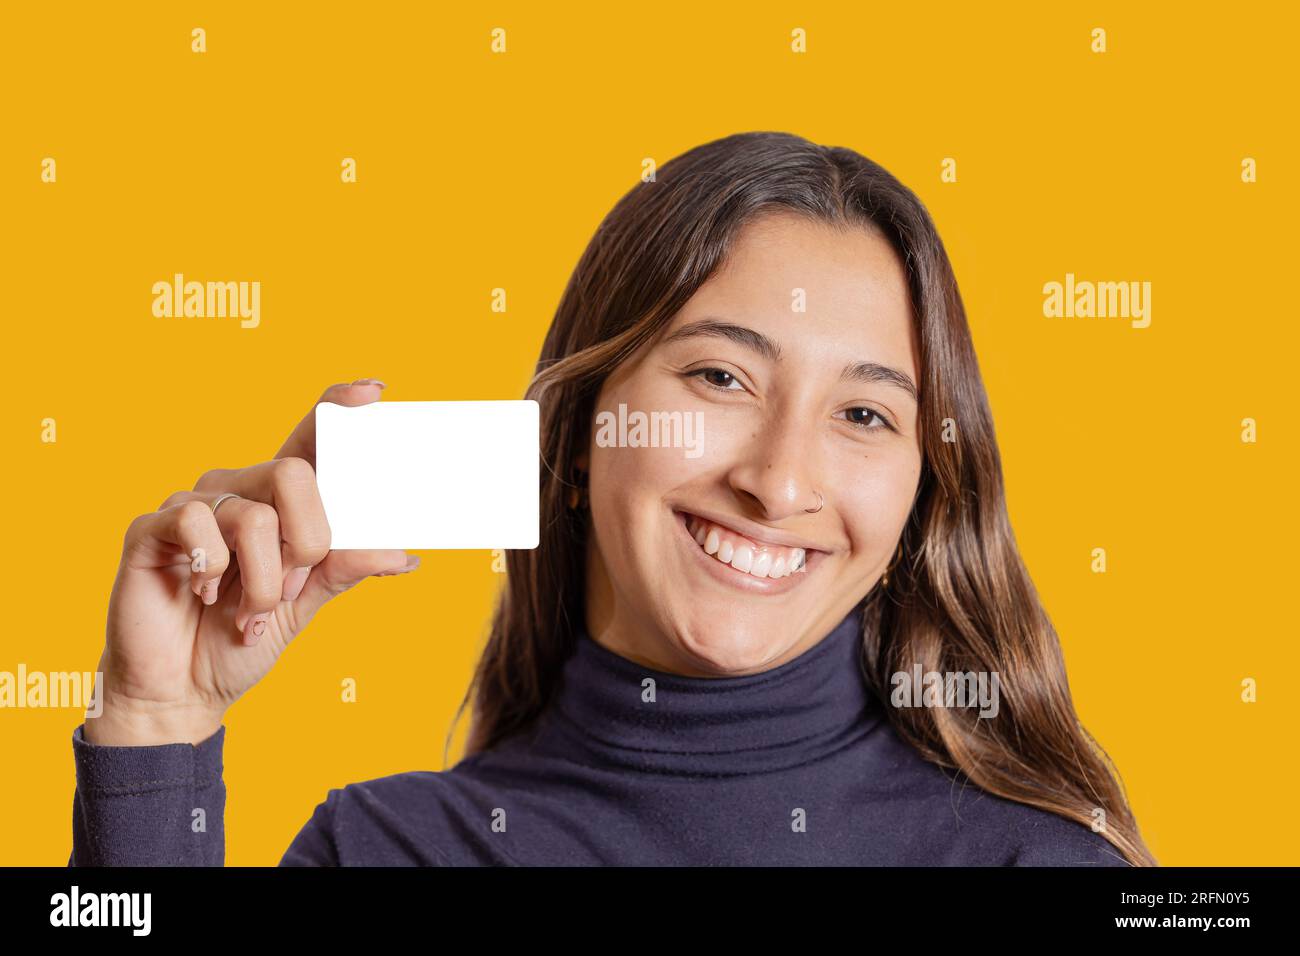 Portrait of smiling latina girl showing a blank card isolated on yellow background. Stock Photo